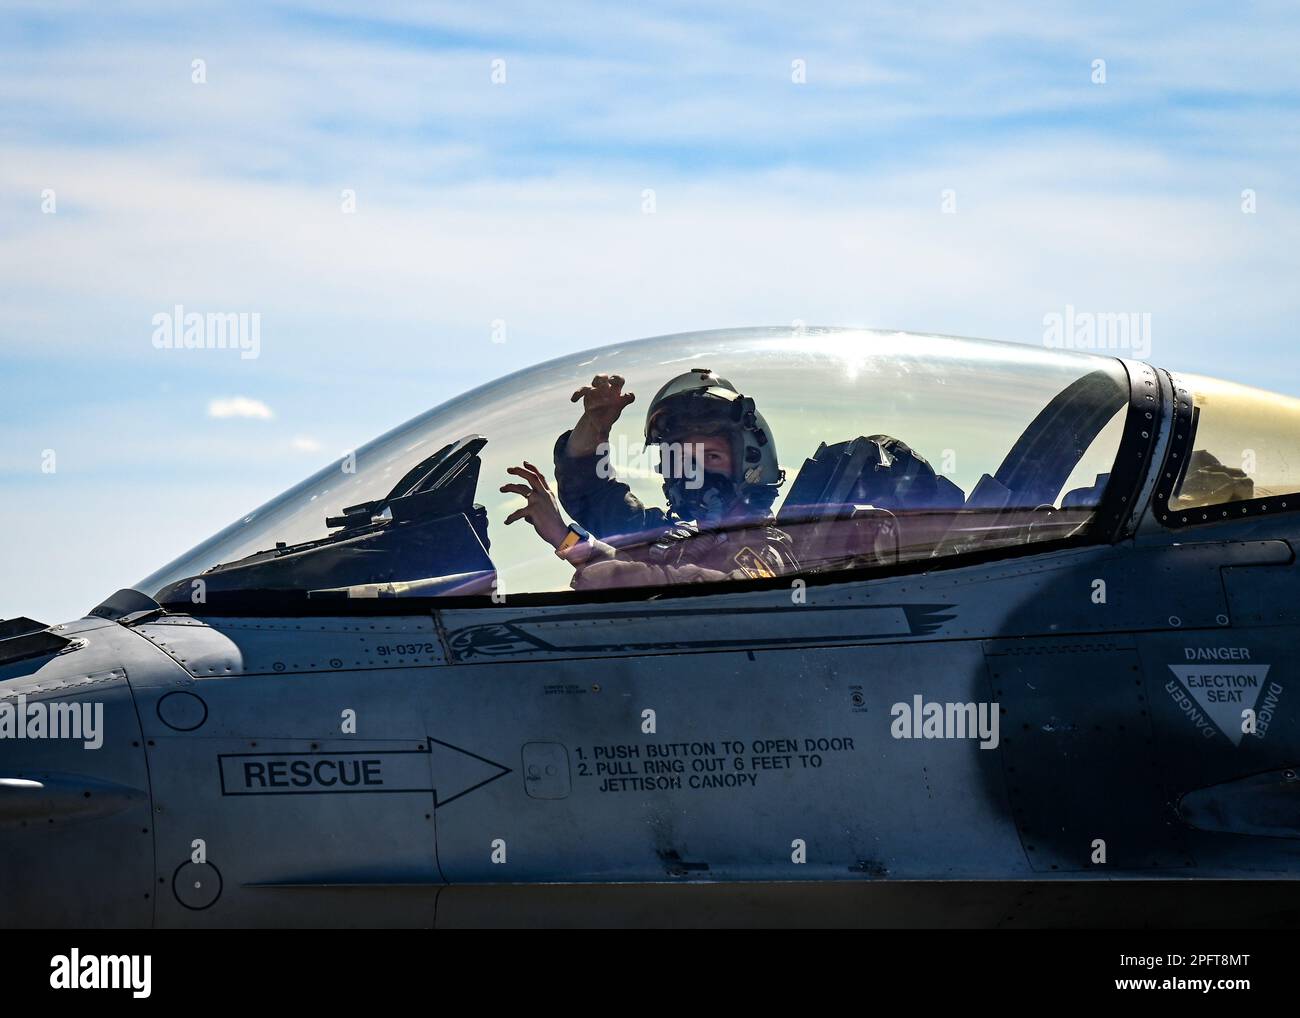 A U.S. Air Force pilot assigned to the 79th Fighter Squadron displays the squadron’s signature “Tiger, Tiger” hand signal during the first day of exercise Red Flag-Nellis 23-2 at Nellis Air Force Base, Nevada, March 13, 2023. Through dedicated training opportunities like RFN 23-2, Wild Weasels work to maintain combat readiness so they can ensure the collective defense of the United States and their partners and allies. (U.S. Air Force photo by Staff Sgt. Madeline Herzog) Stock Photo